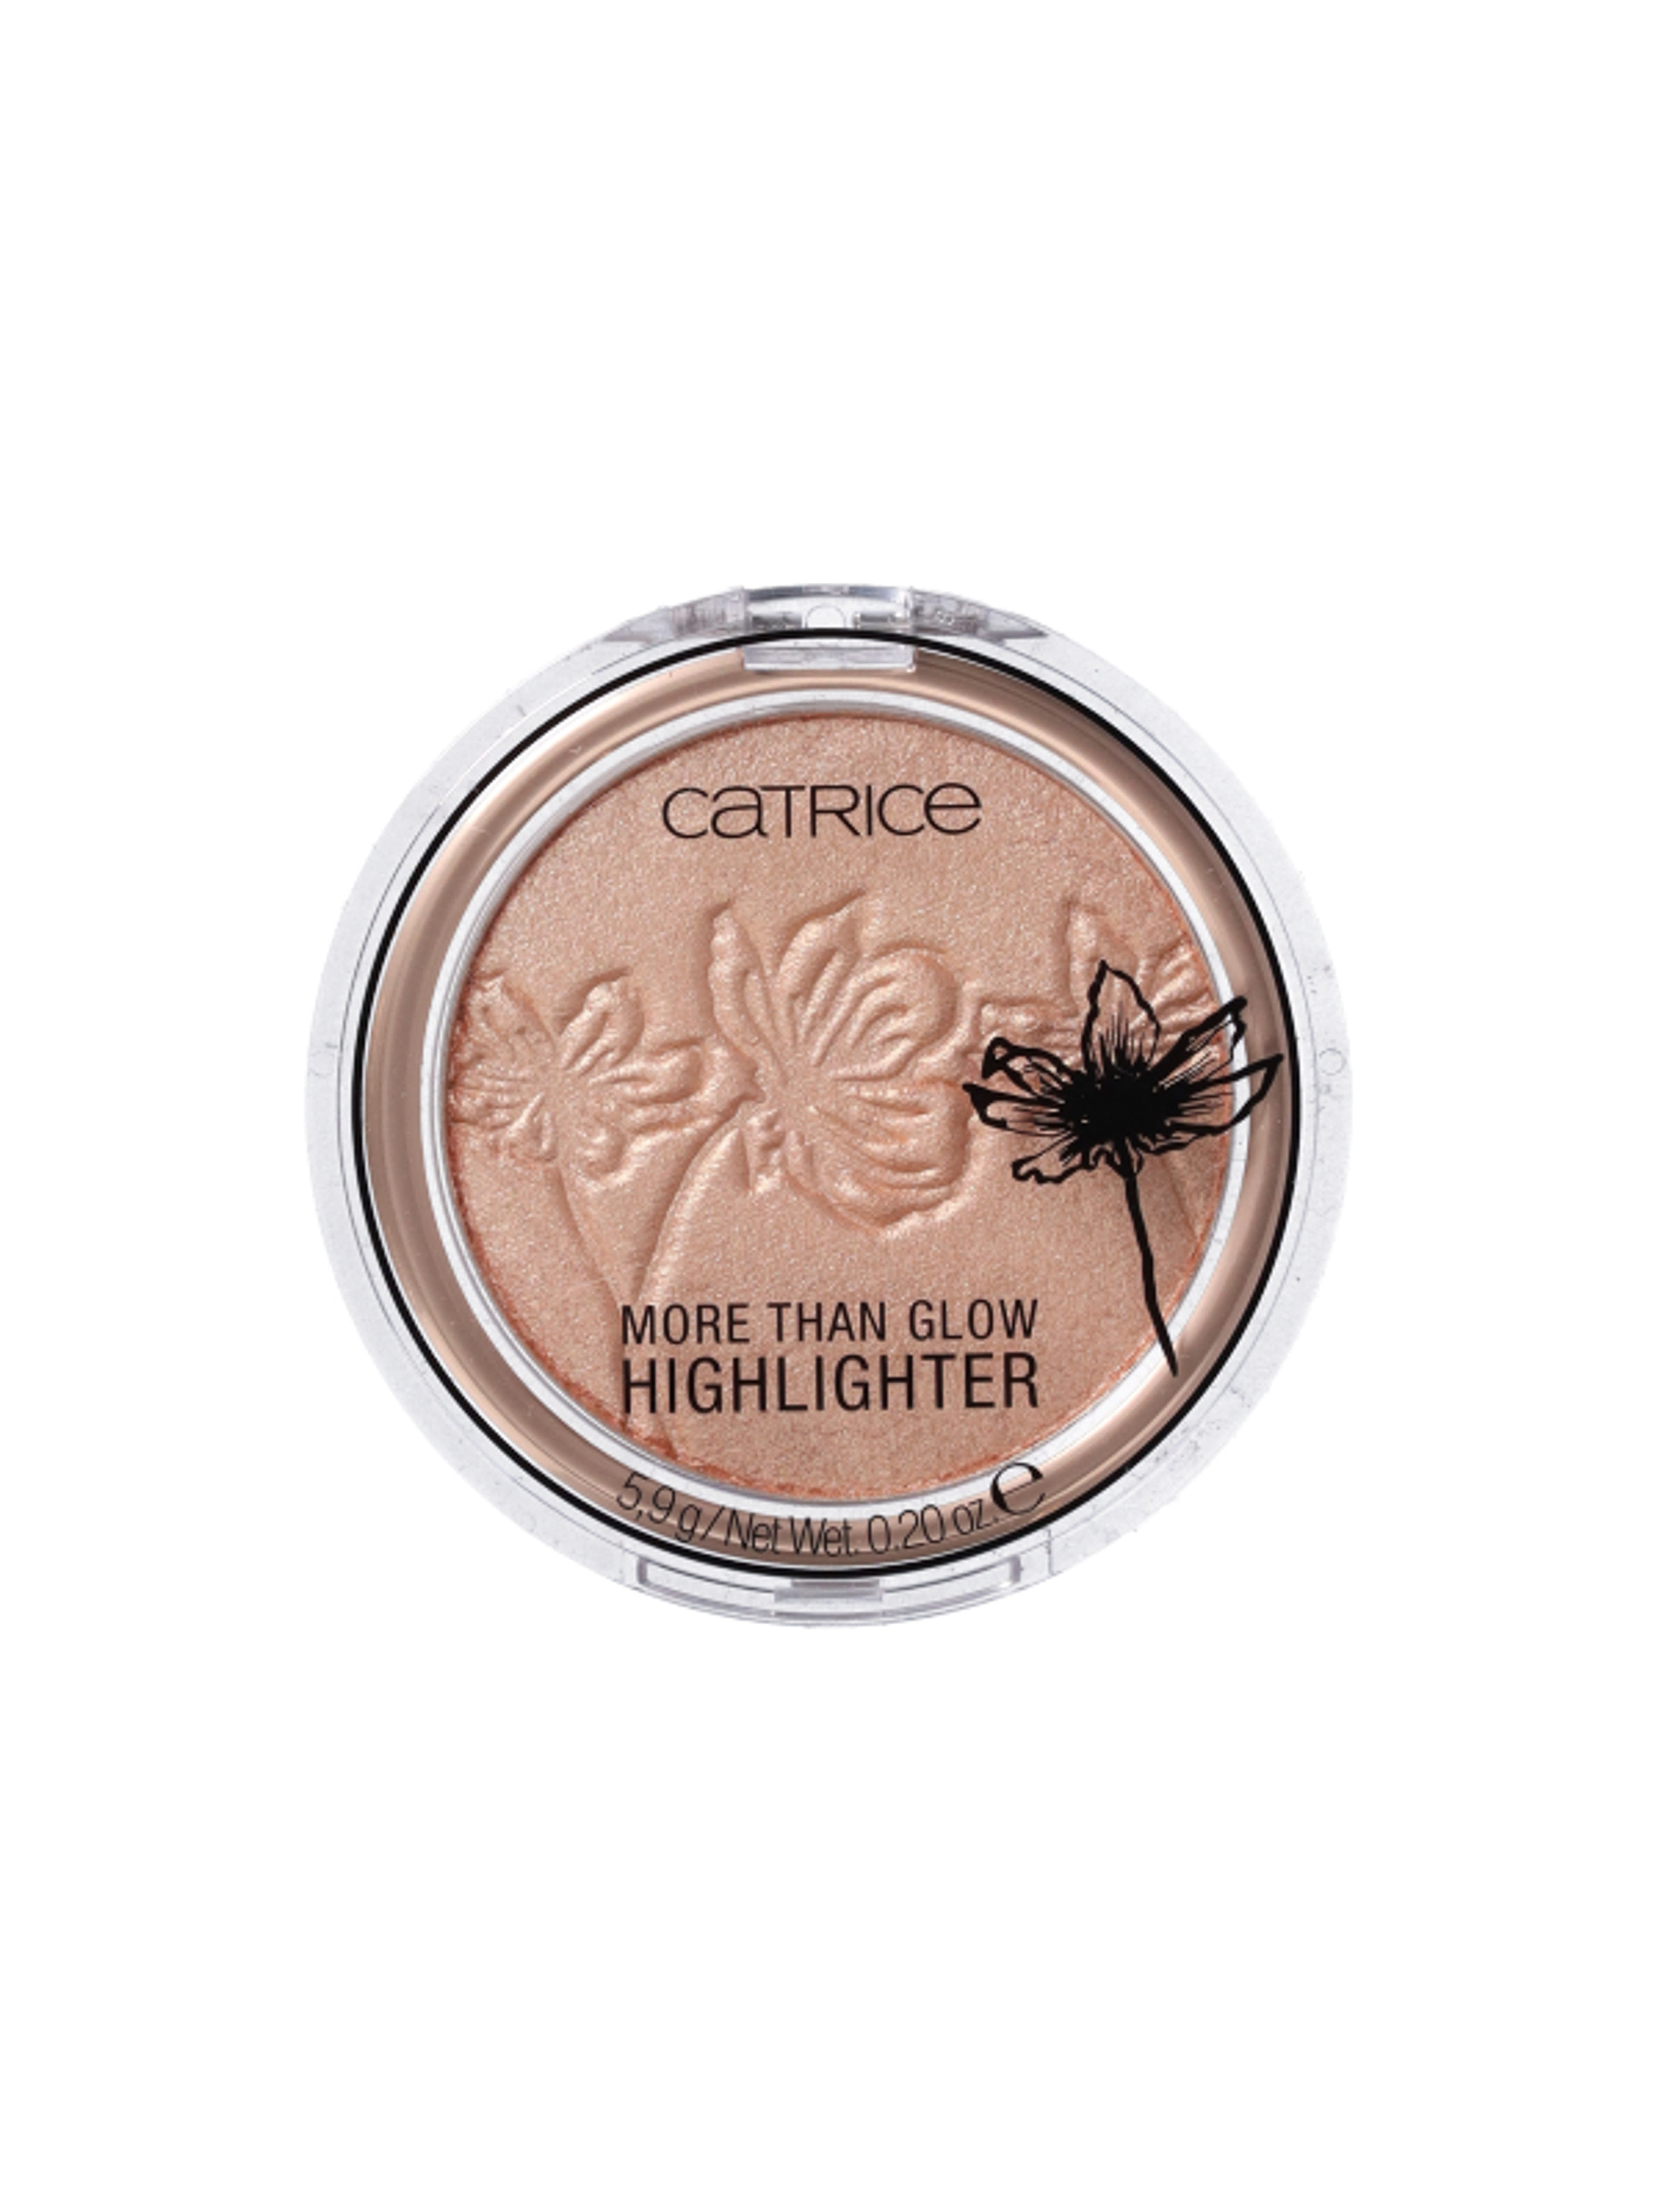 Catrice highlighter more than glow /030 - 1 db-1